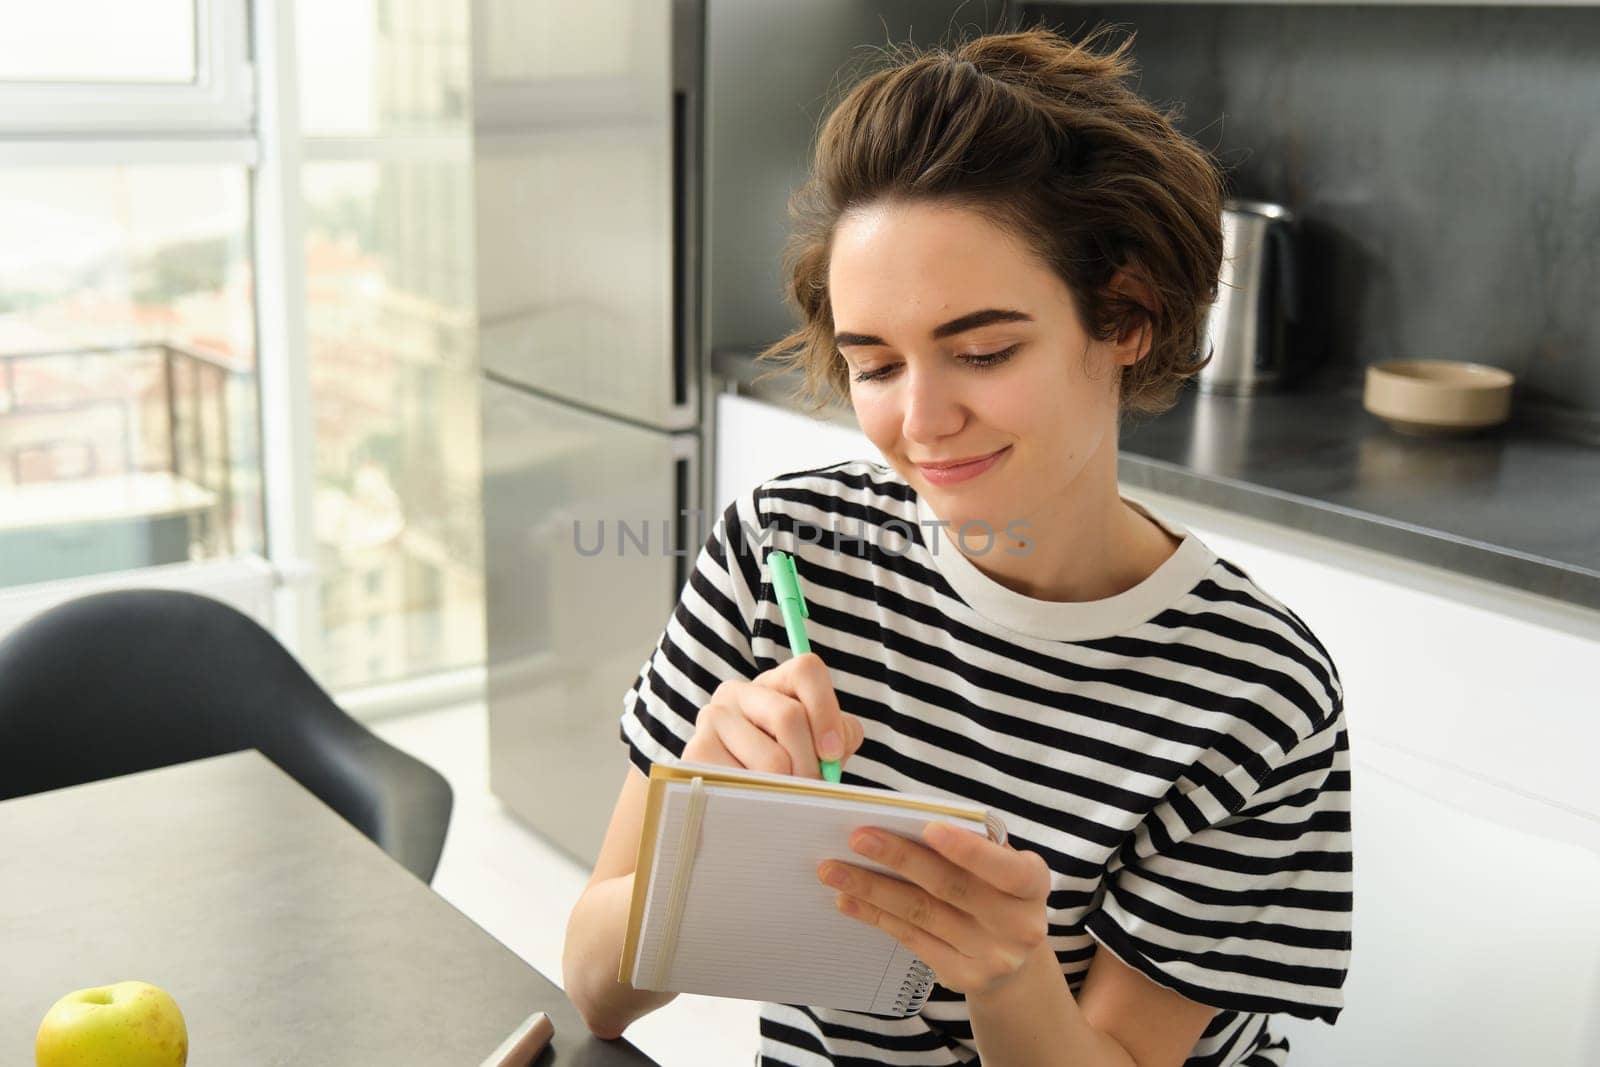 Close up portrait of smiling, cute woman with notebook, writing down recipe, making notes or grocery list for shopping, sitting in the kitchen.